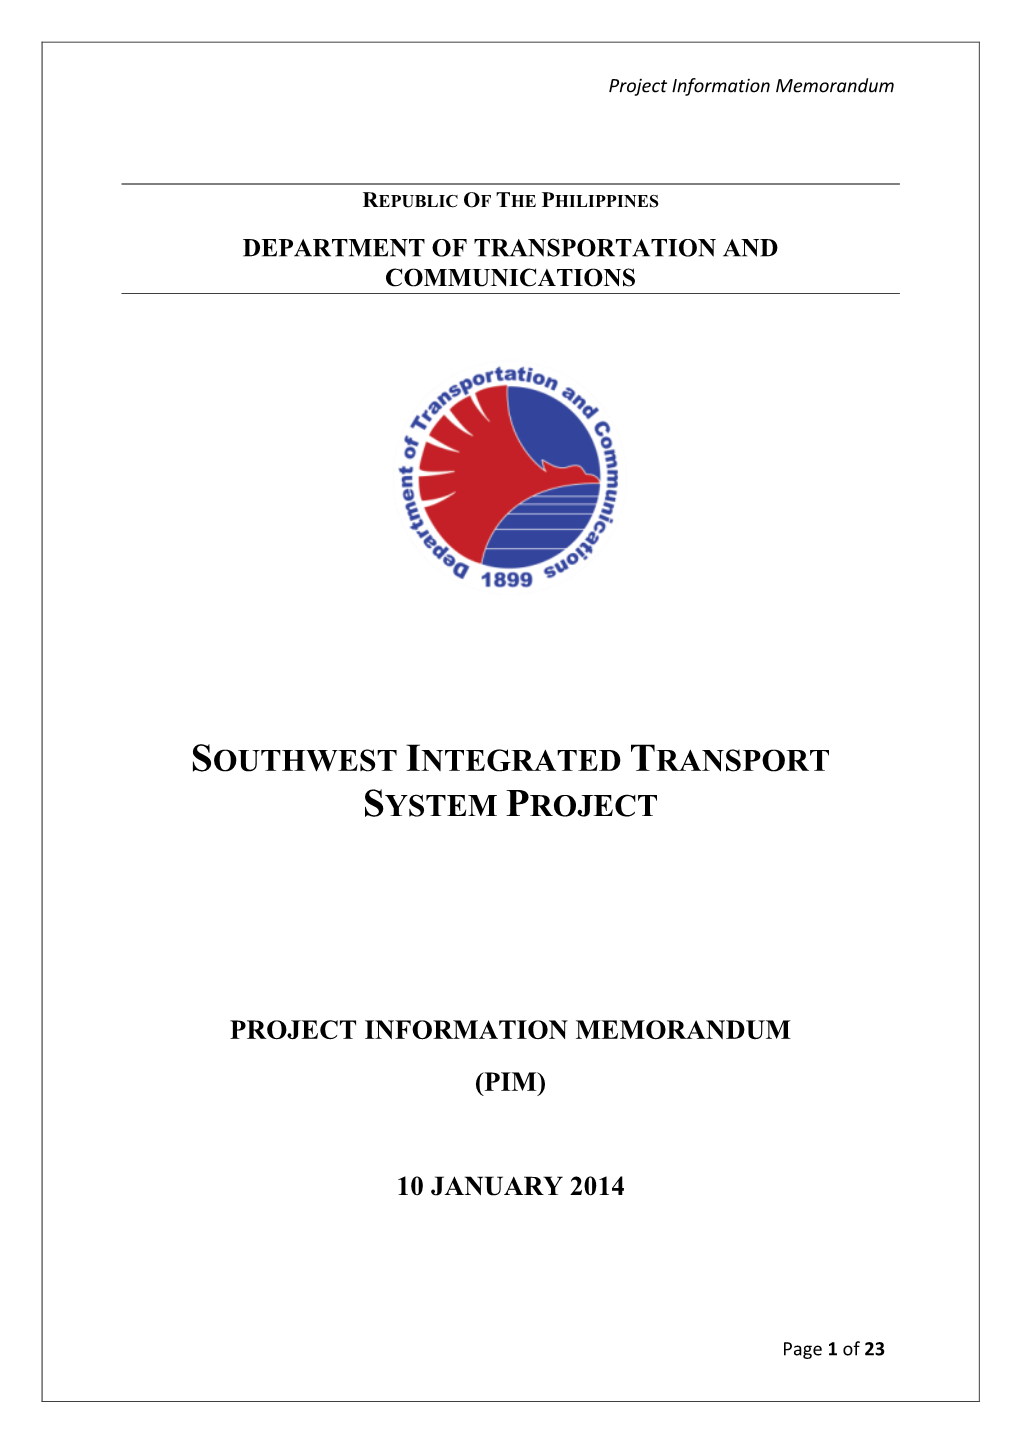 Southwest Integrated Transport System Project